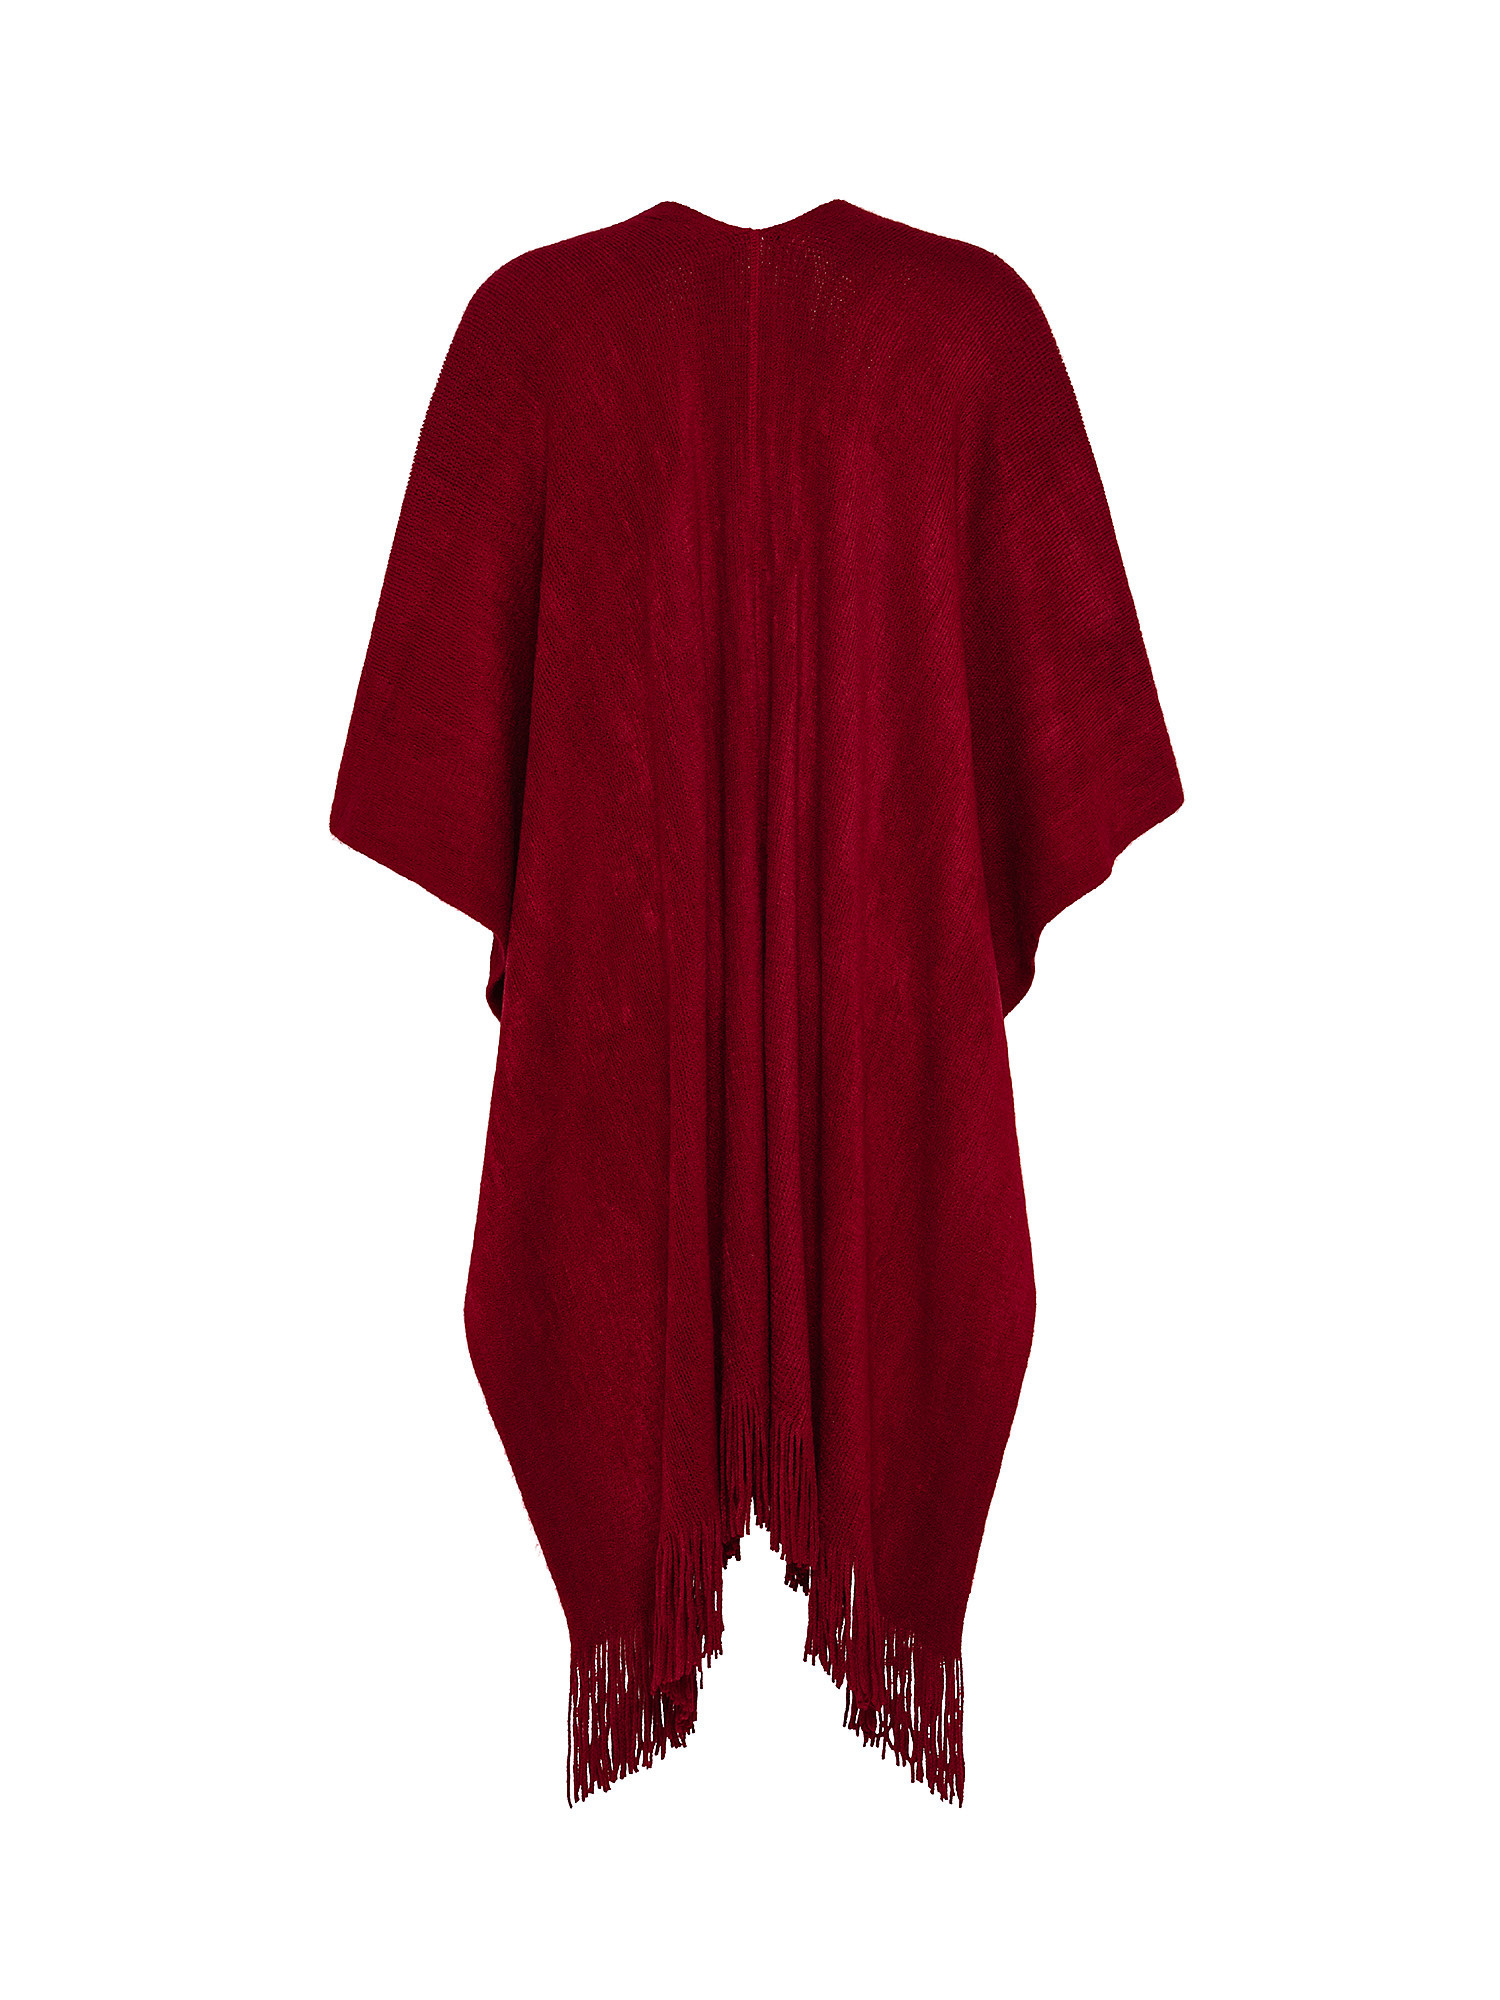 Cape with fringes, Red, large image number 1